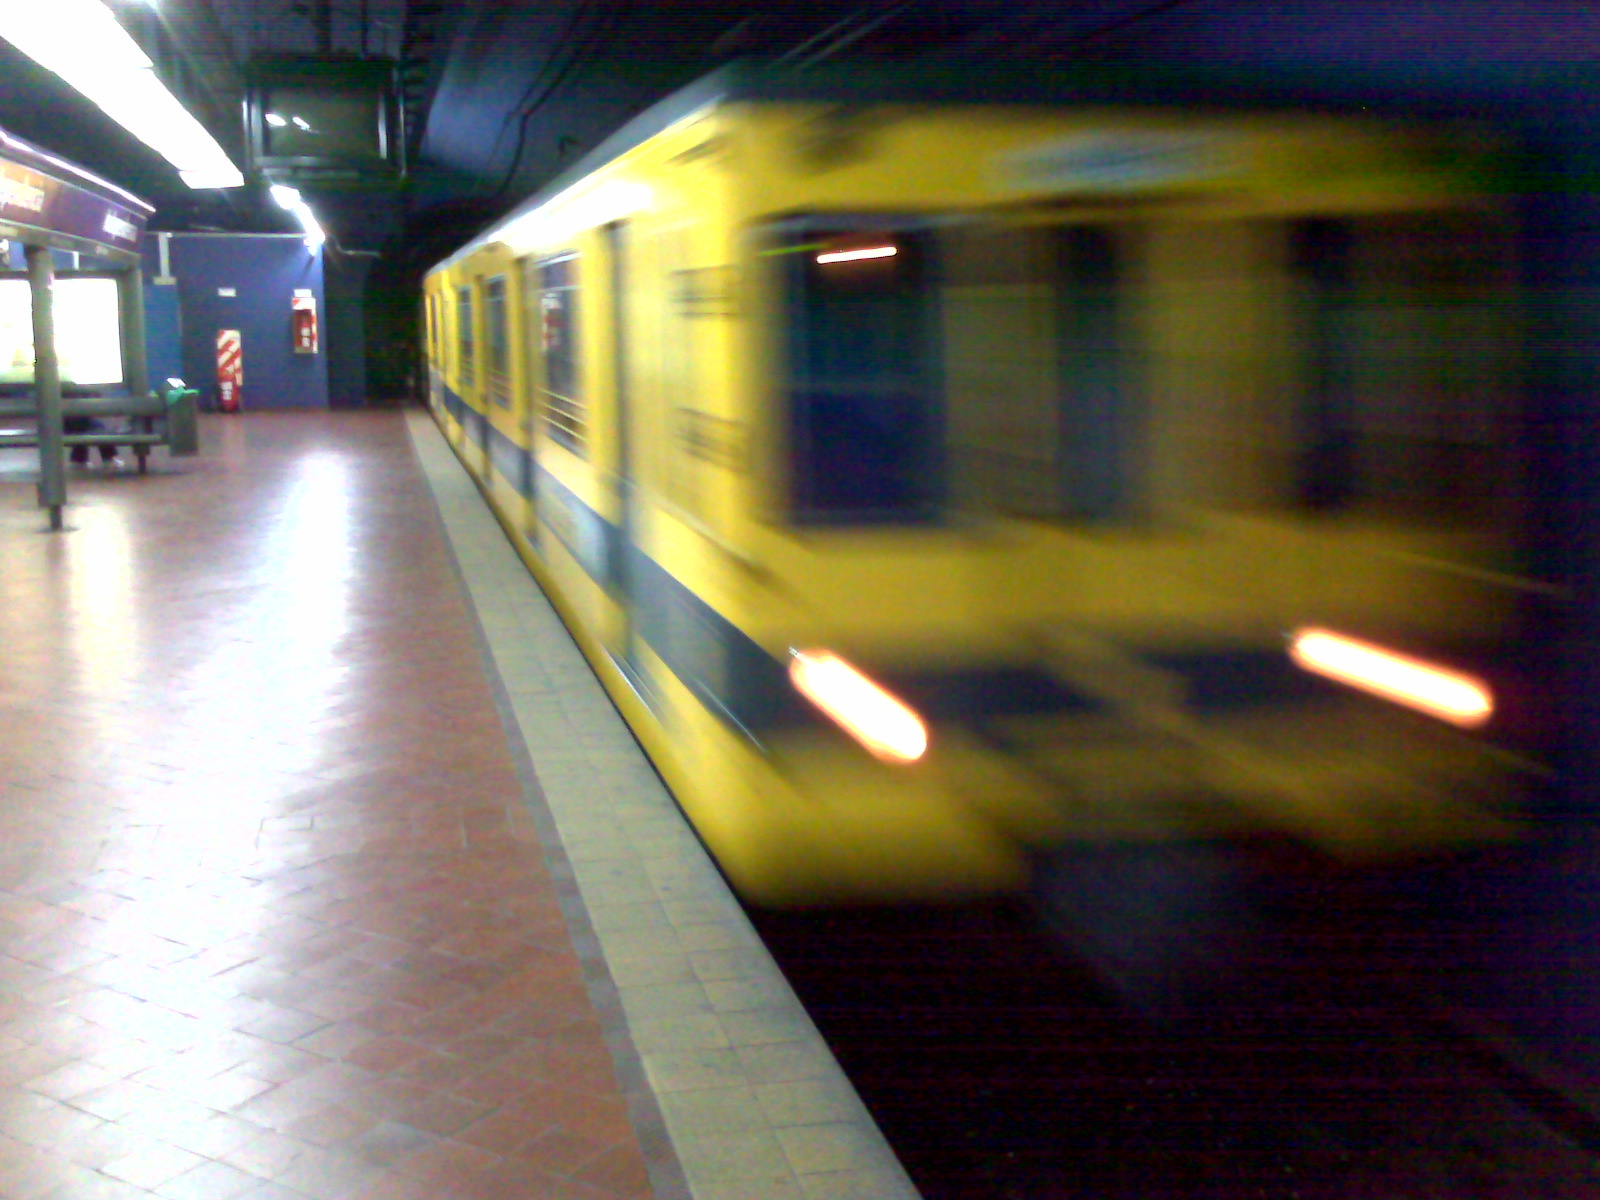 blurred po of a train at a subway station